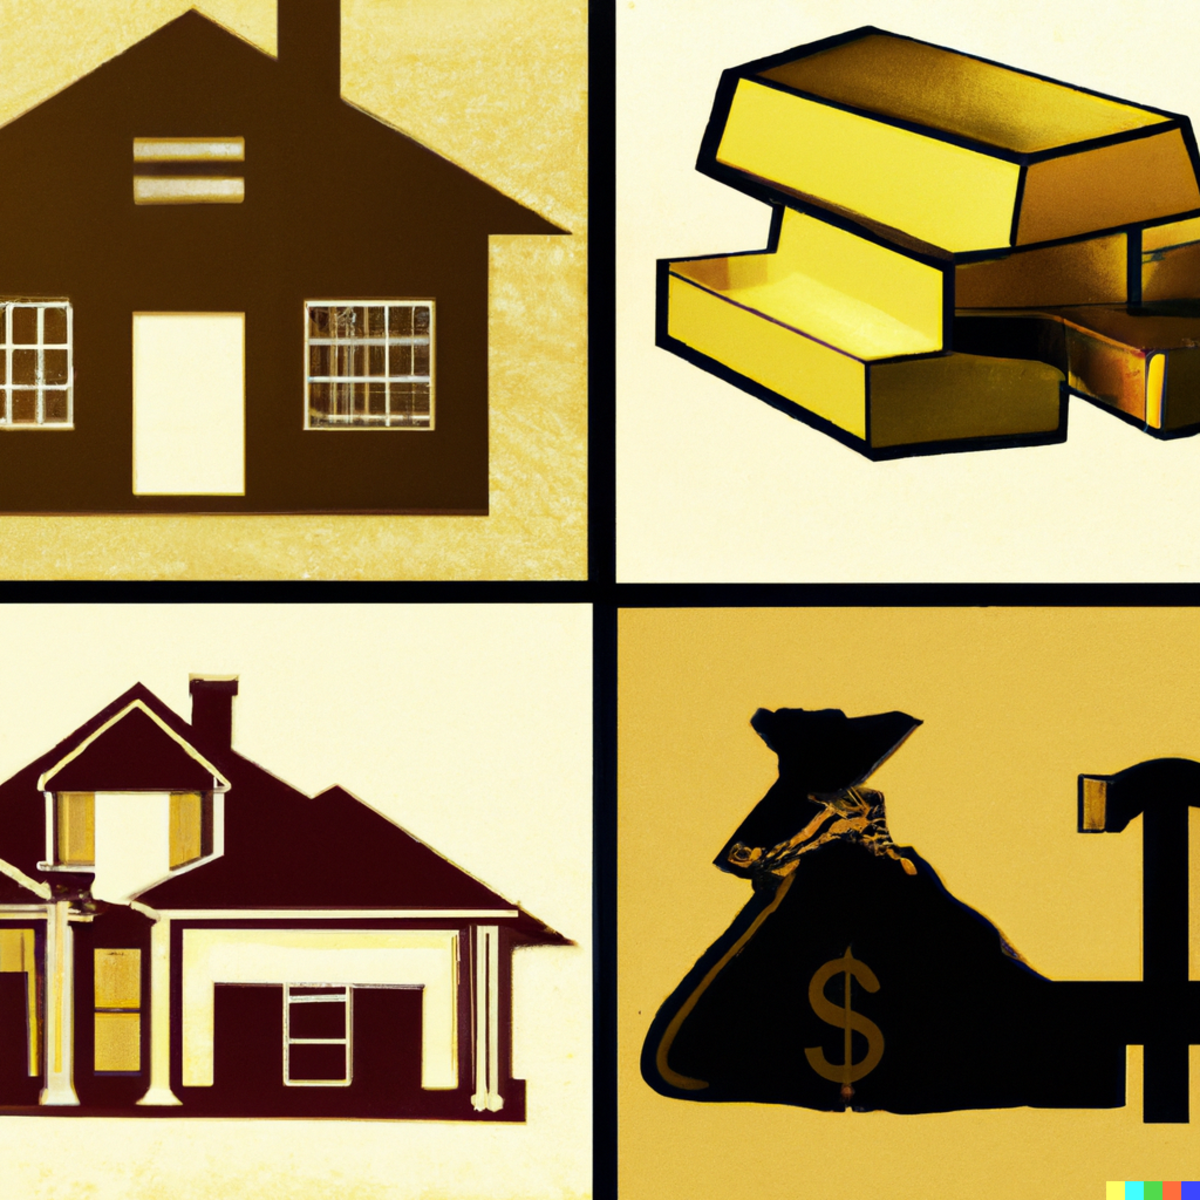 Stocks, Gold, Oil, and Houses: Market Capitalizations in Familiar Terms